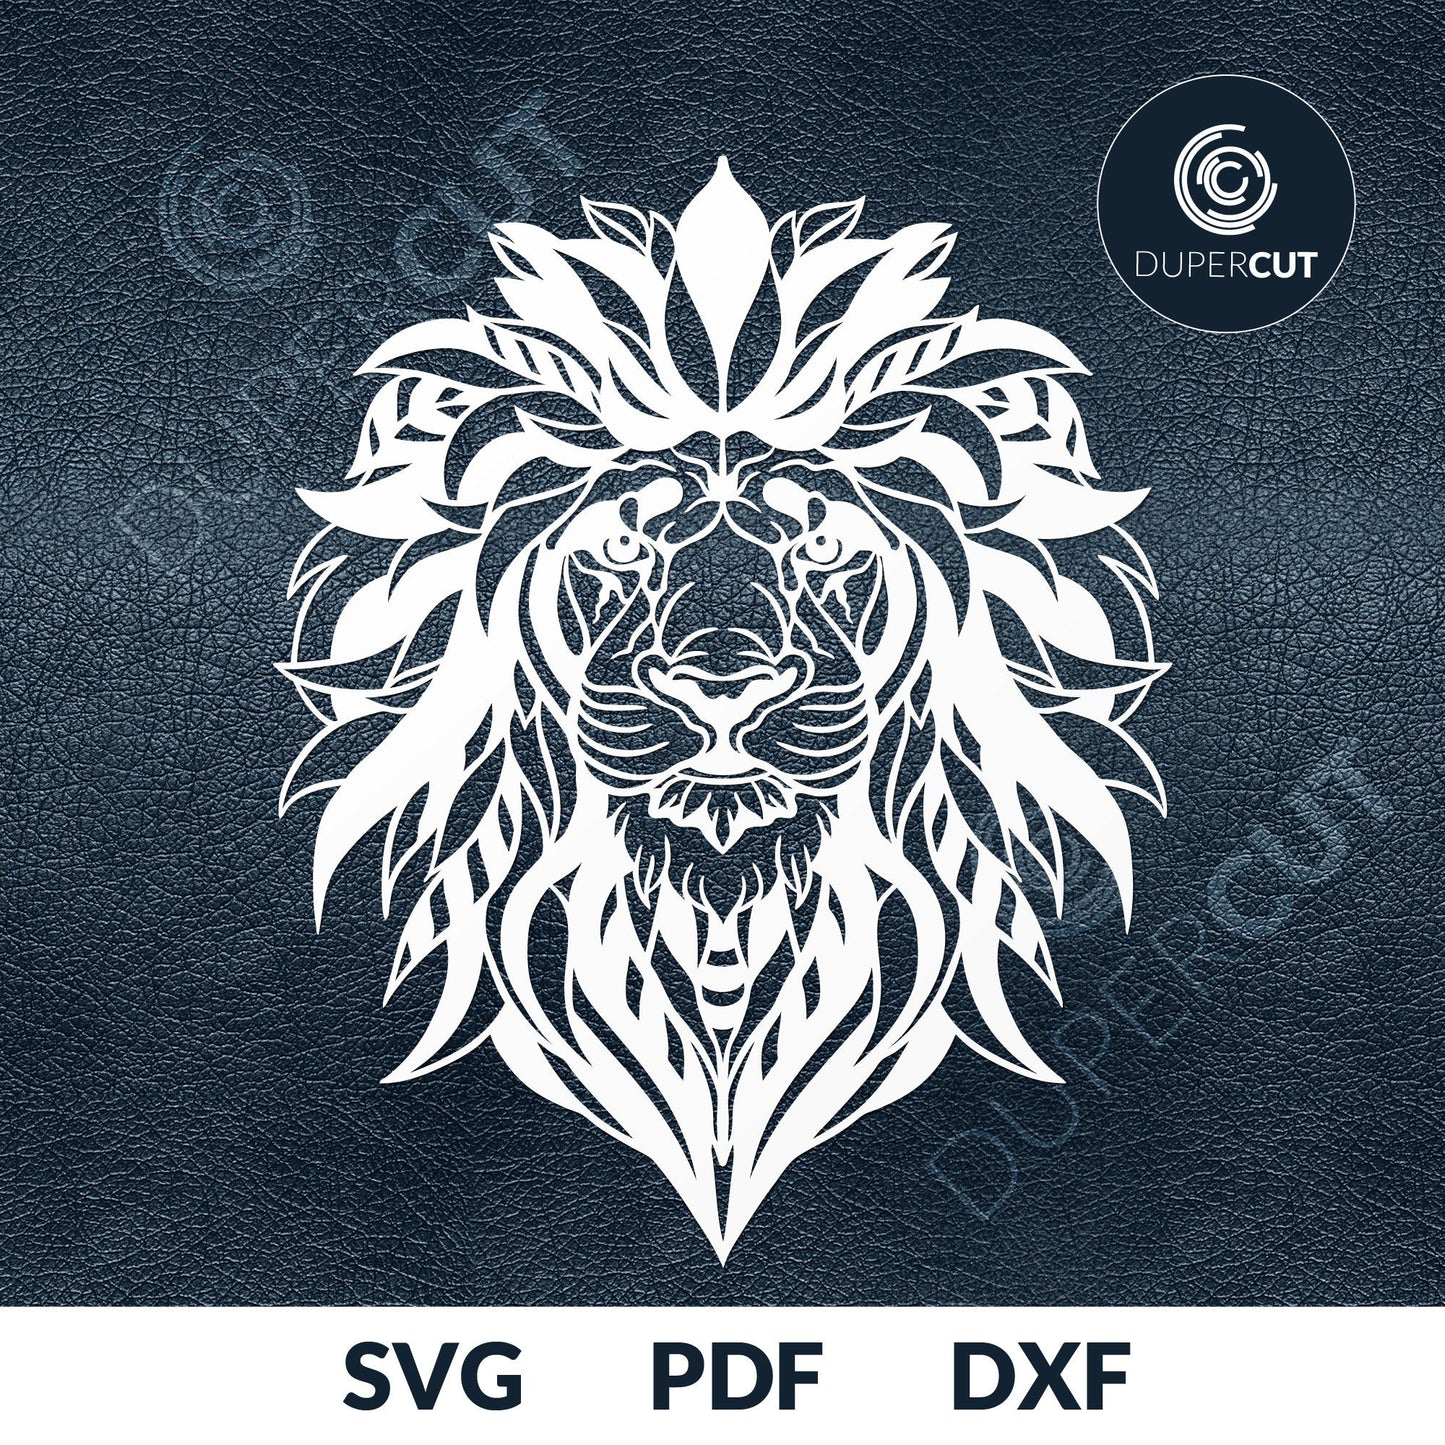 Lion tiger vinyl template. SVG PNG DXF files Paper cutting template for personal or commercial use. Vinyl template cutting files for Cricut, Glowforge, Silhouette, CNC